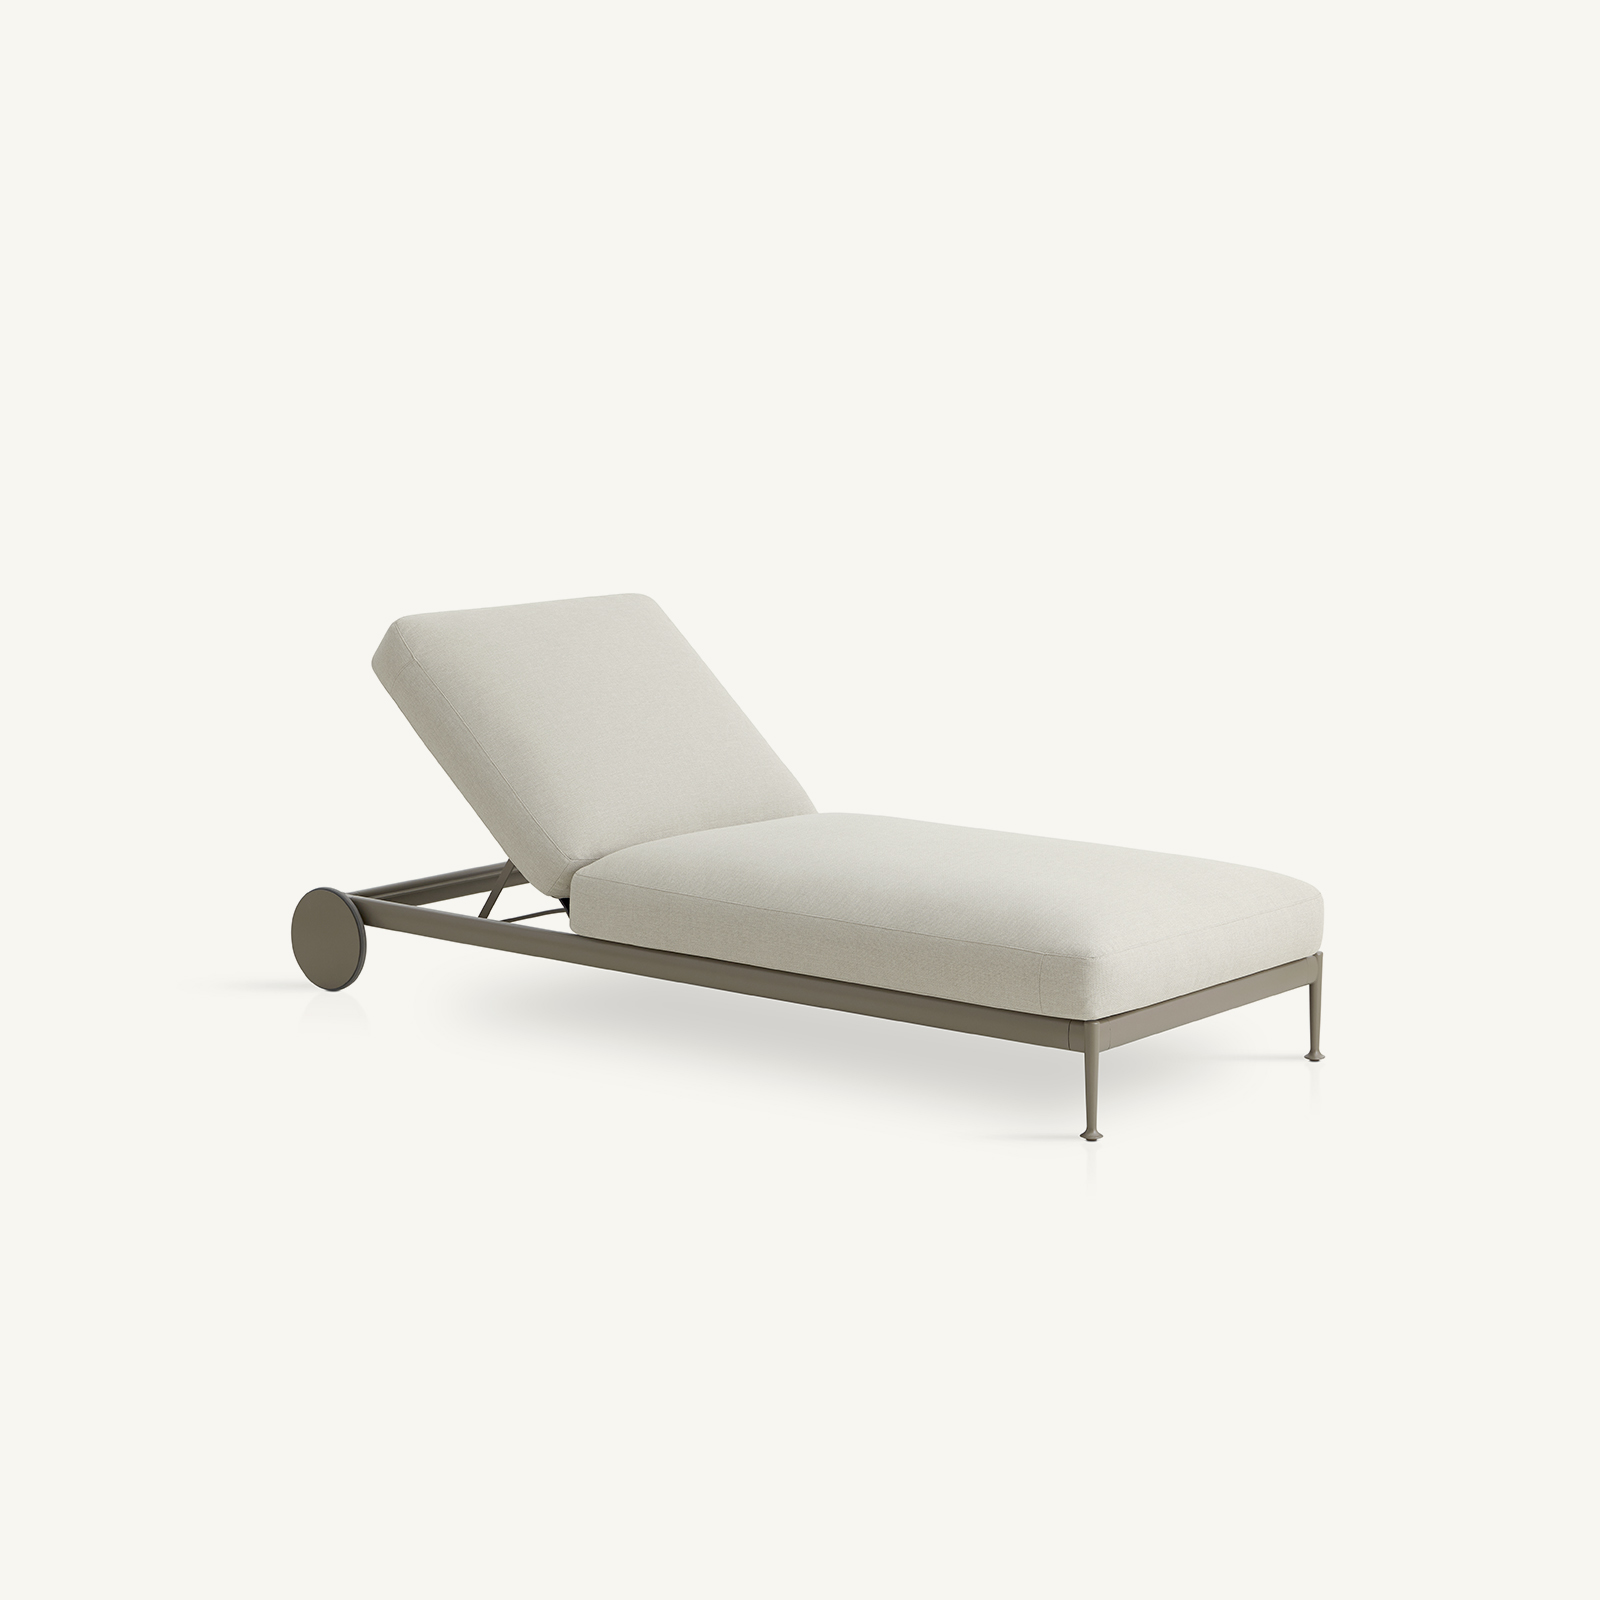 obi chaise longue with wheels